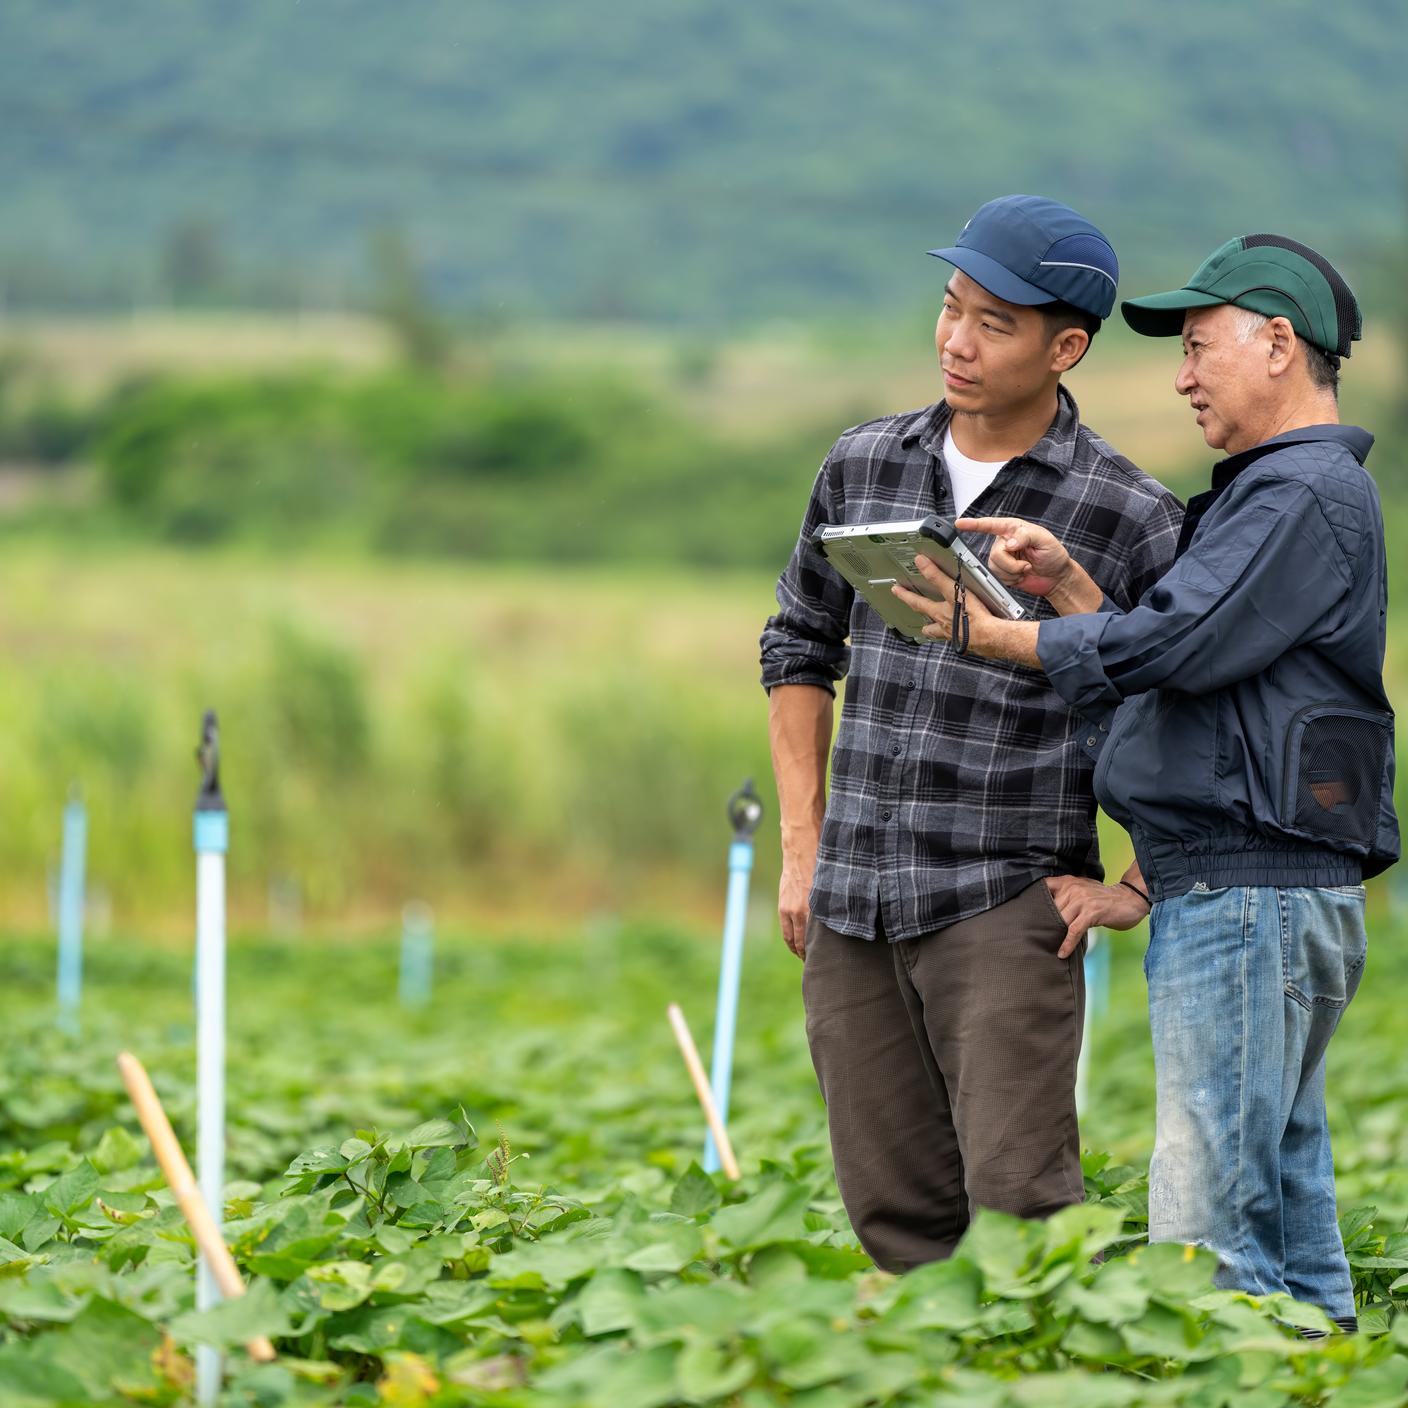 Researchers discussing farm conditions using tablet computer